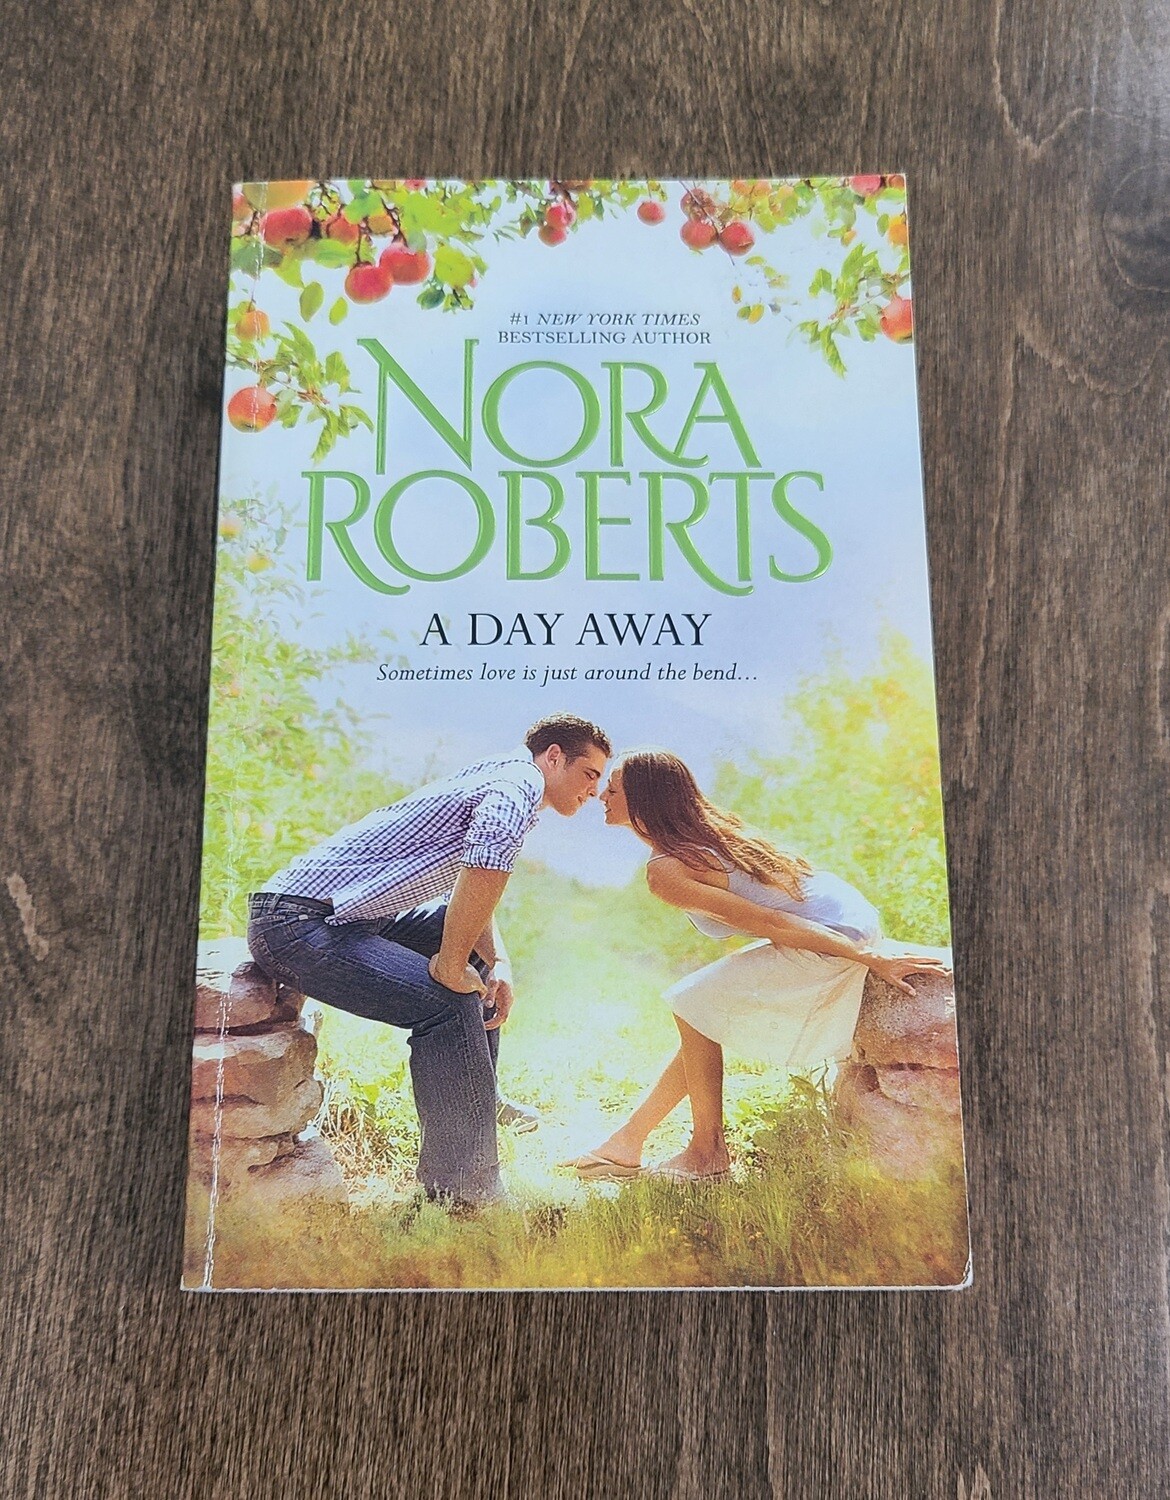 A Day Away by Nora Roberts